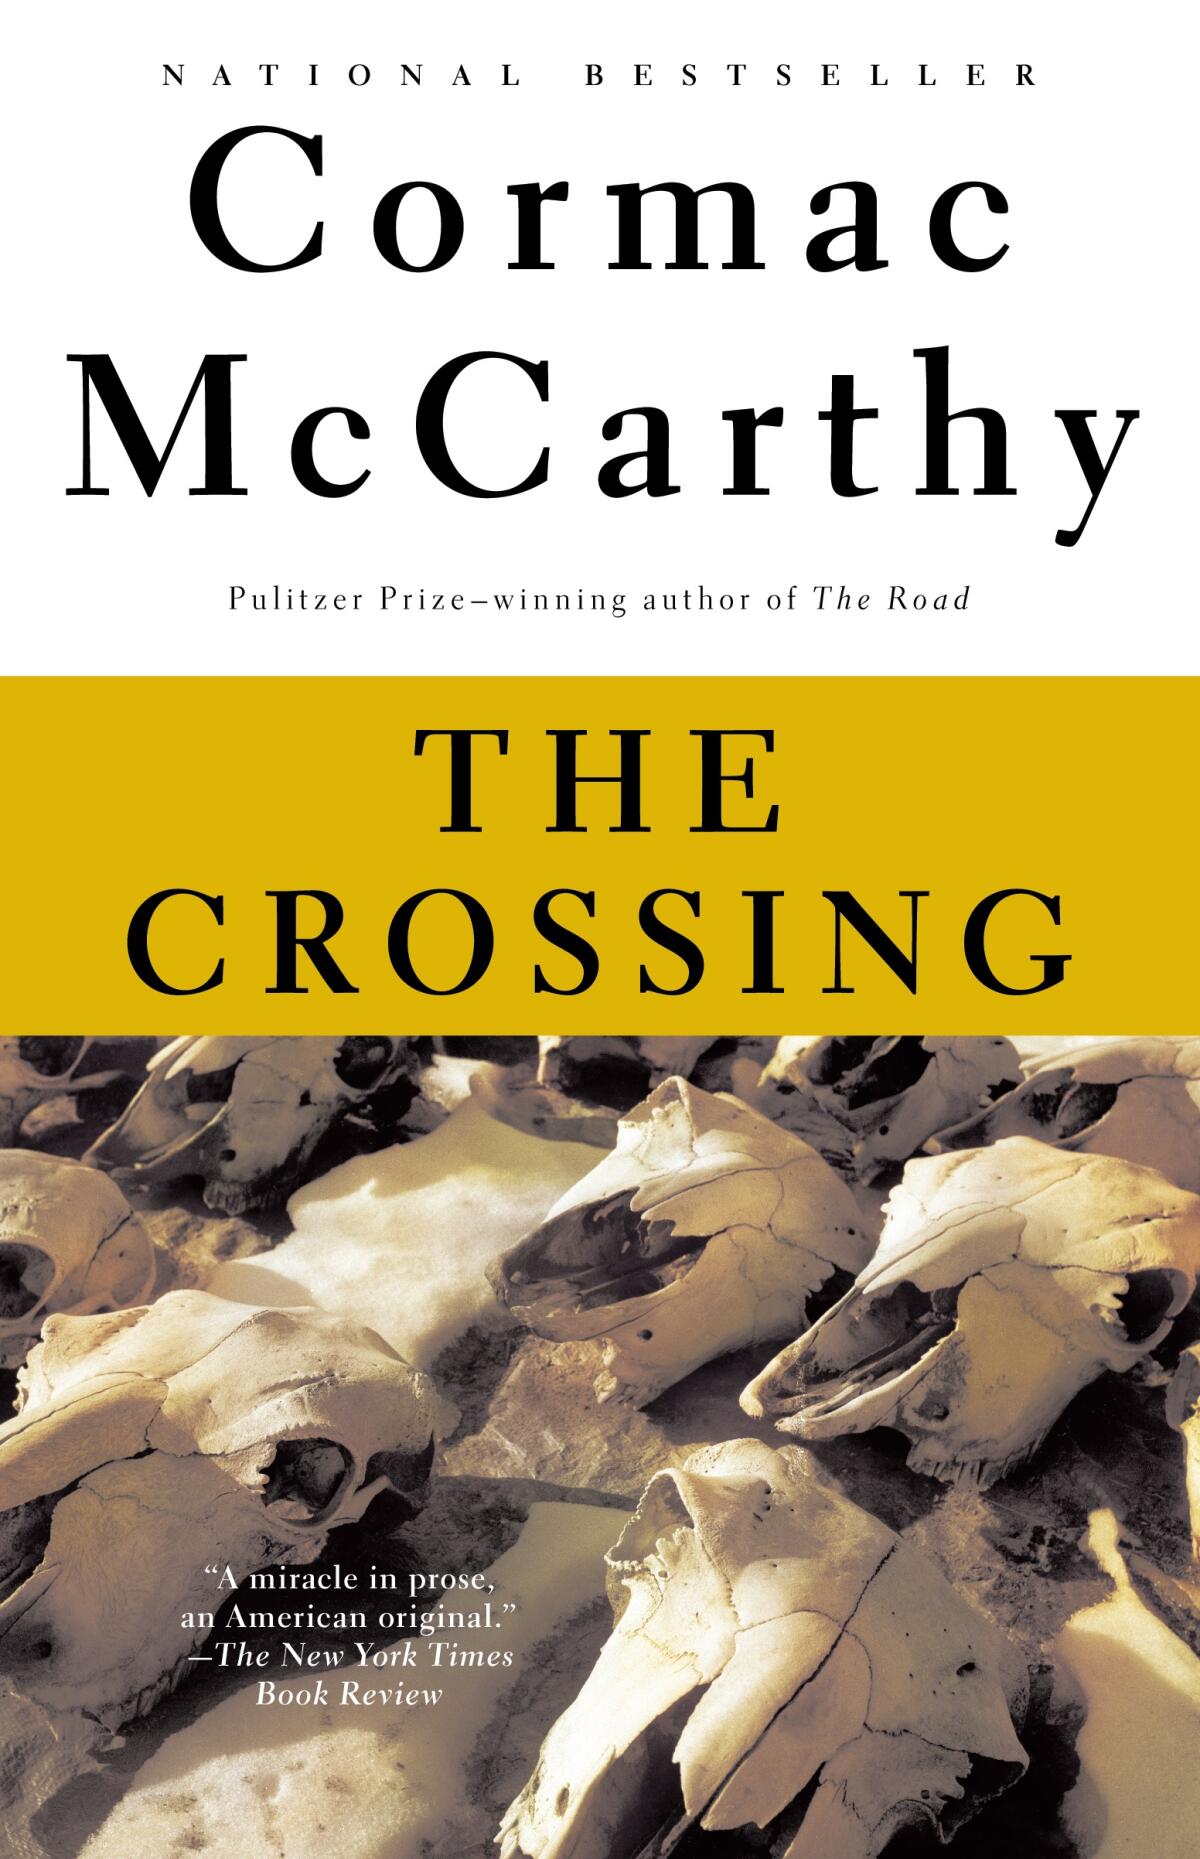 'The Crossing,' by Cormac McCarthy